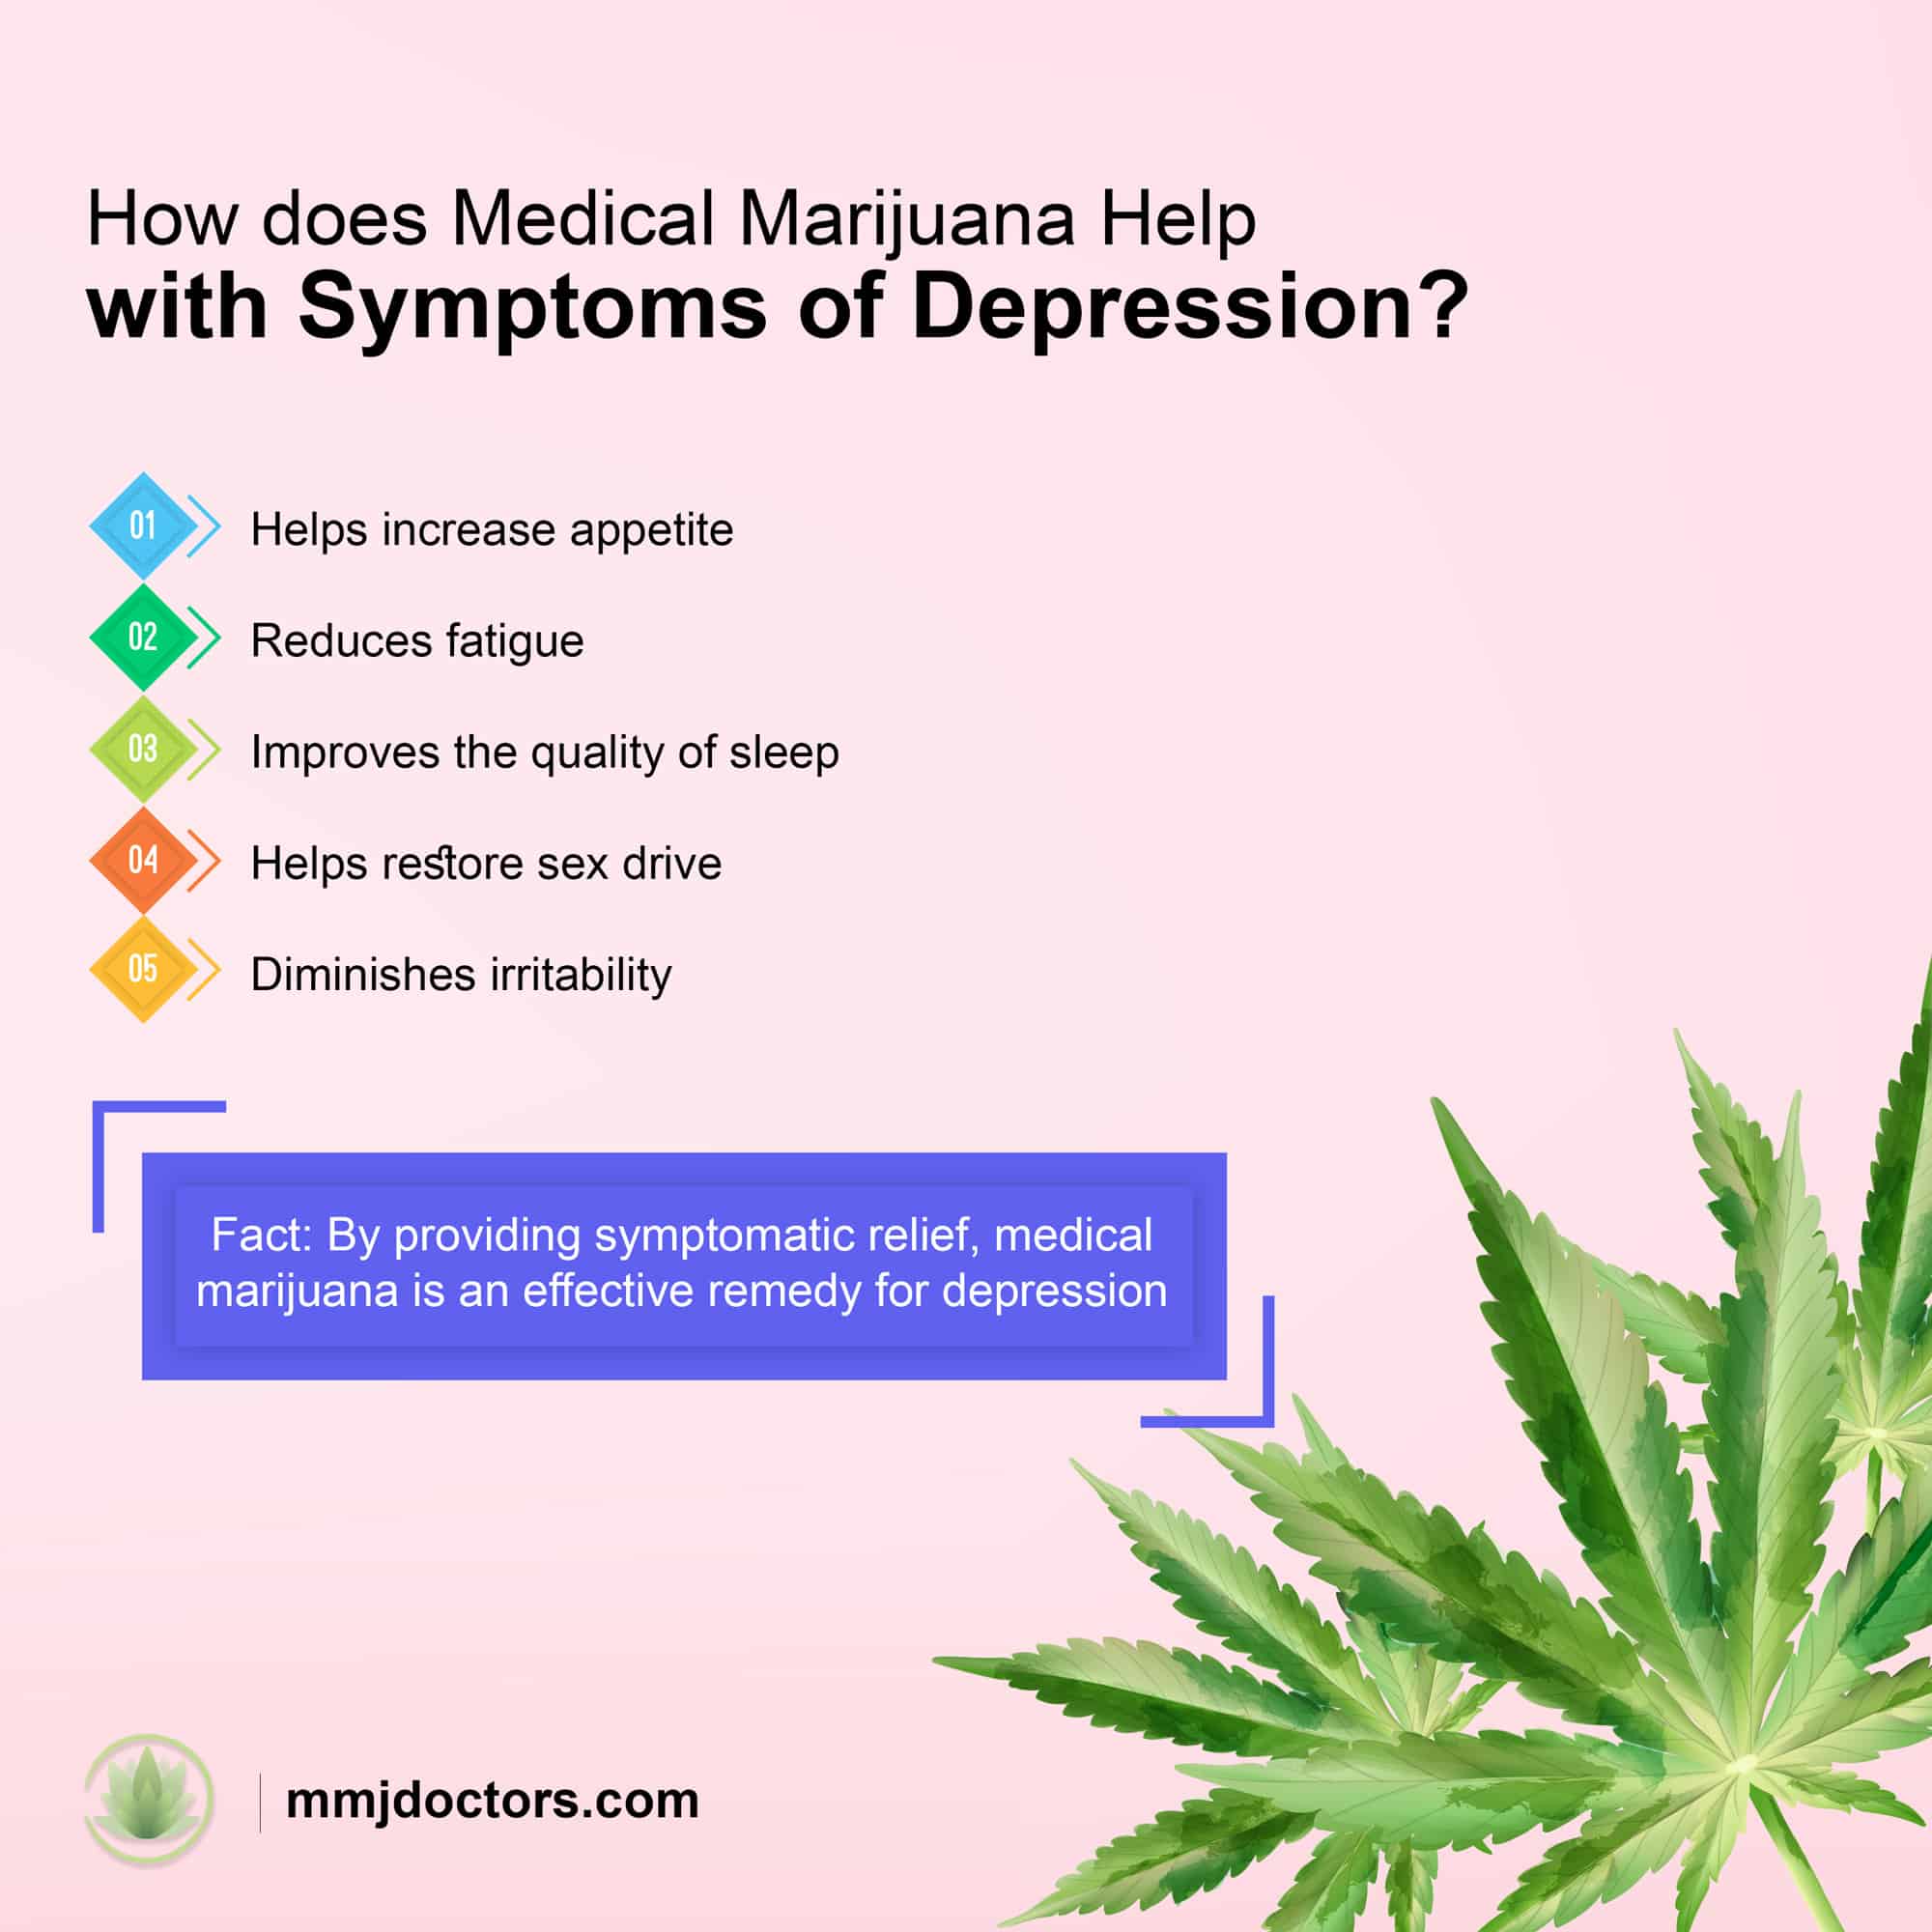 5 Ways Medical Marijuana can Help with Depression in New York